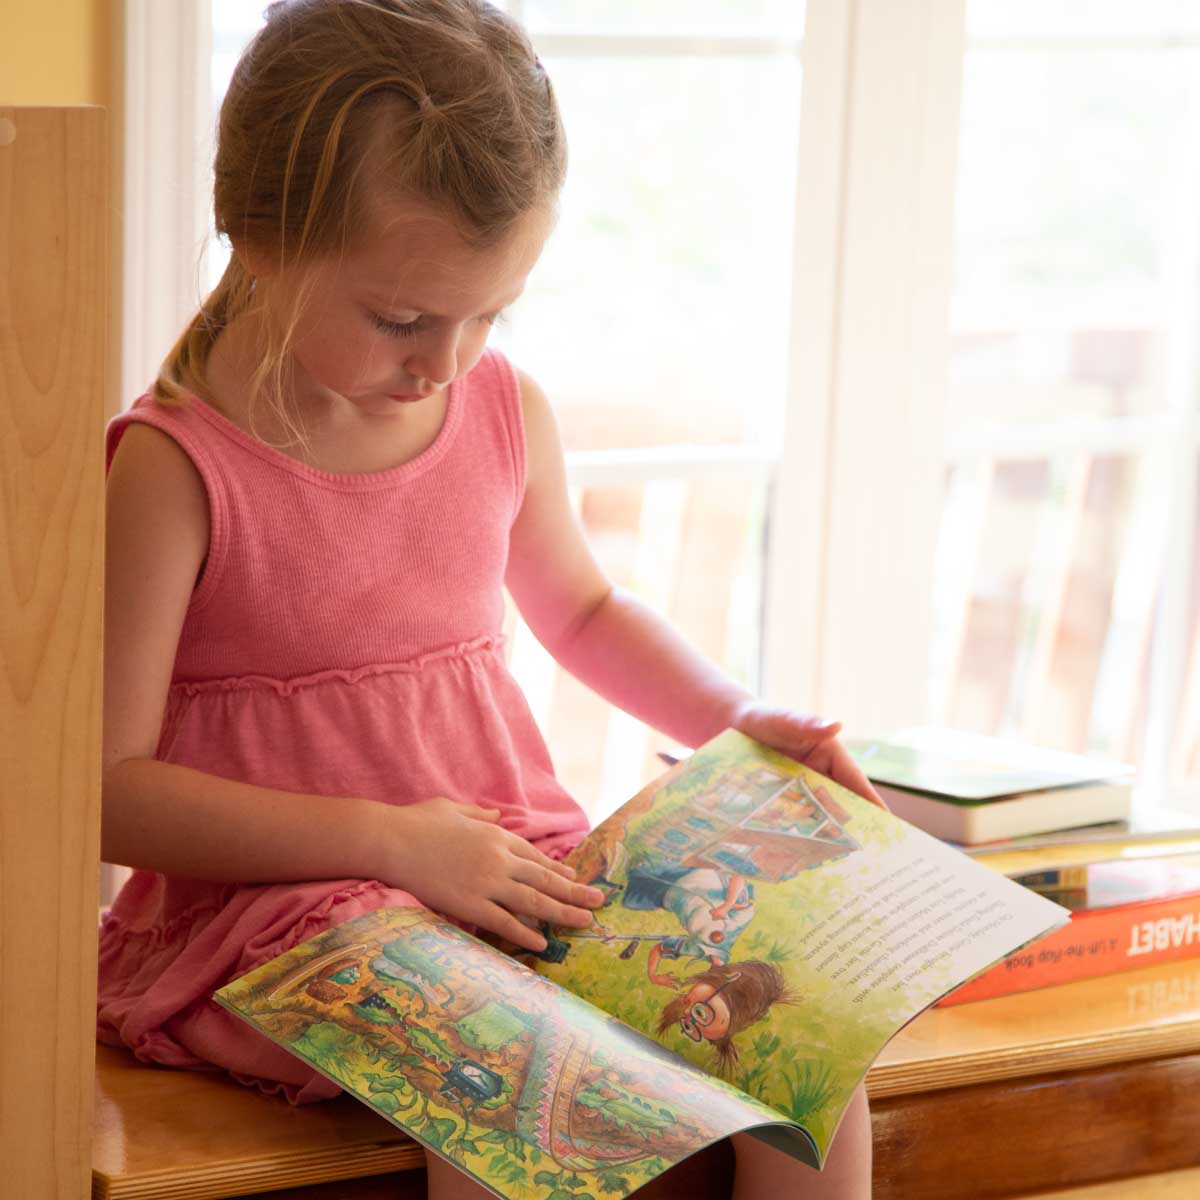 A young girl reads a picture book during summer break.